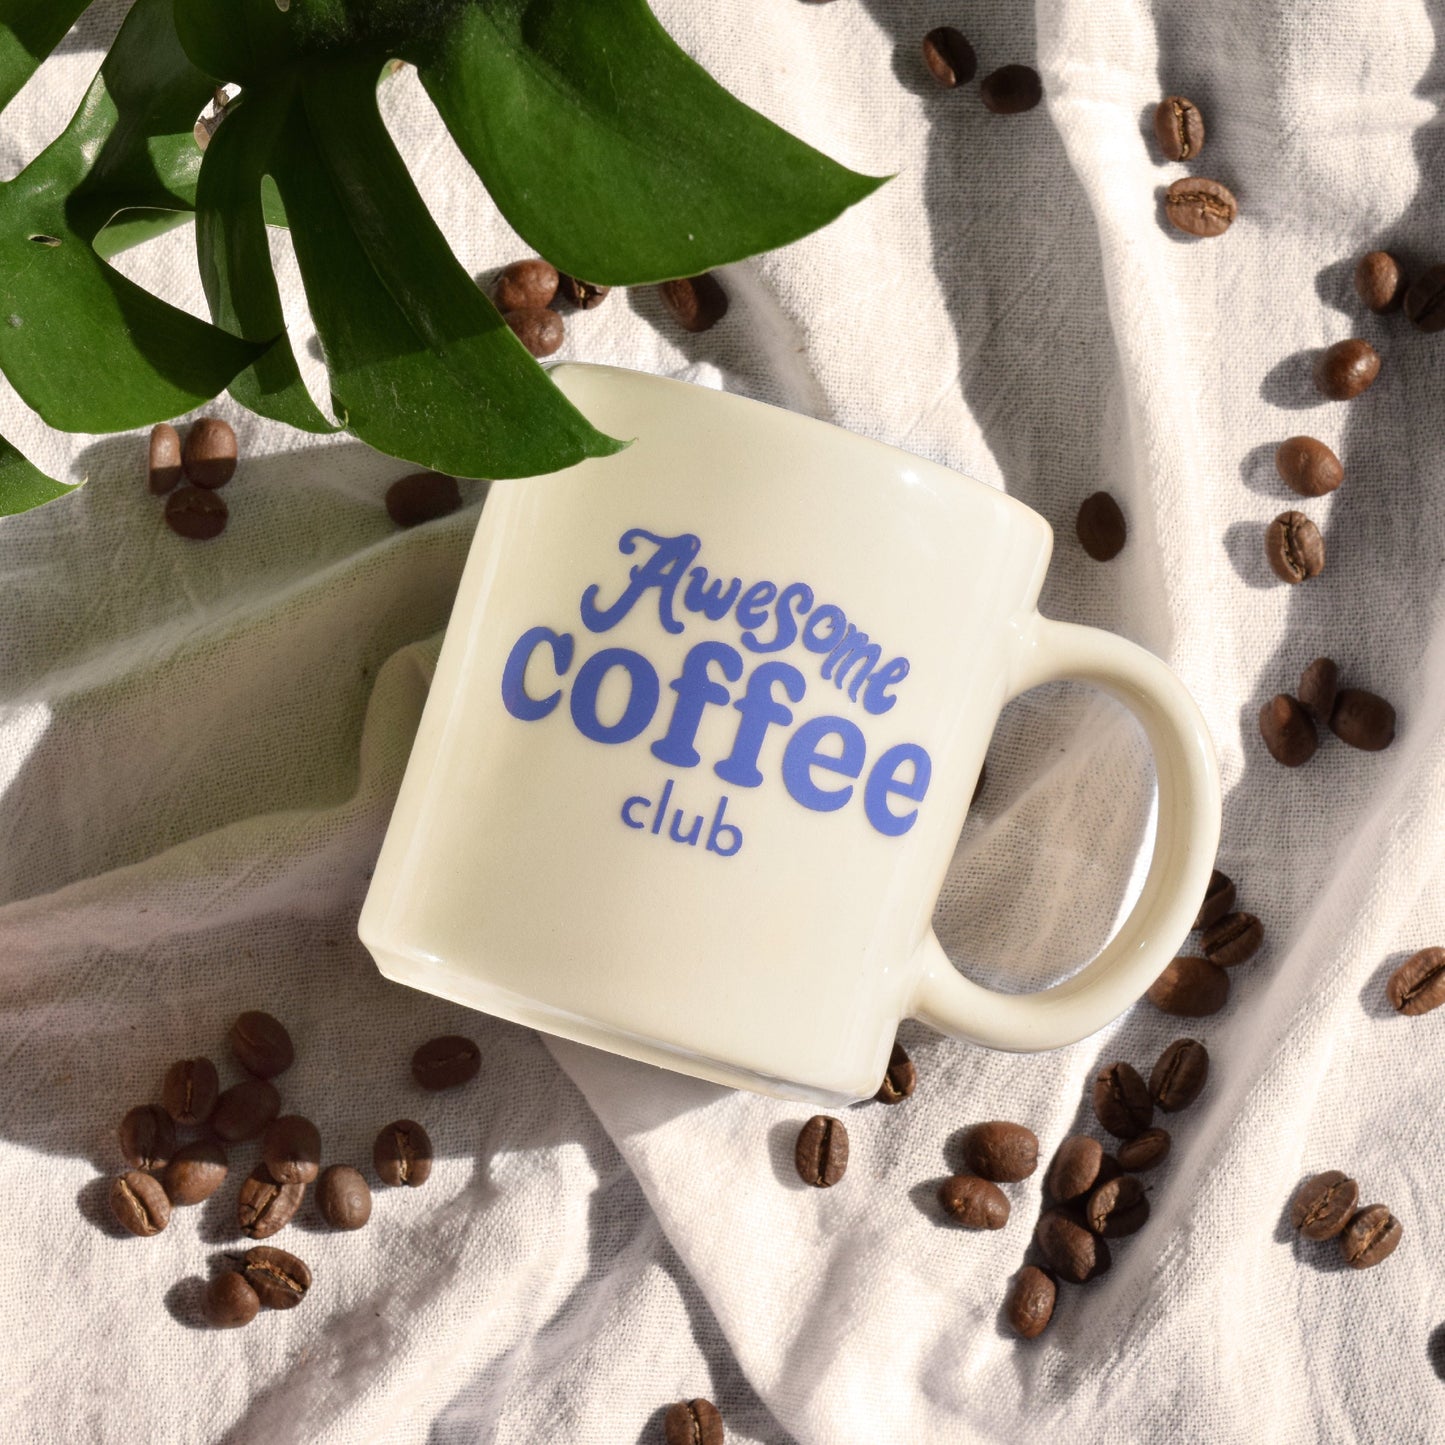 White cafe mug with "Awesome Coffee Club" written in purple. The mug is laid on a sheet with a plant in the corner and coffee beans surrounding it.